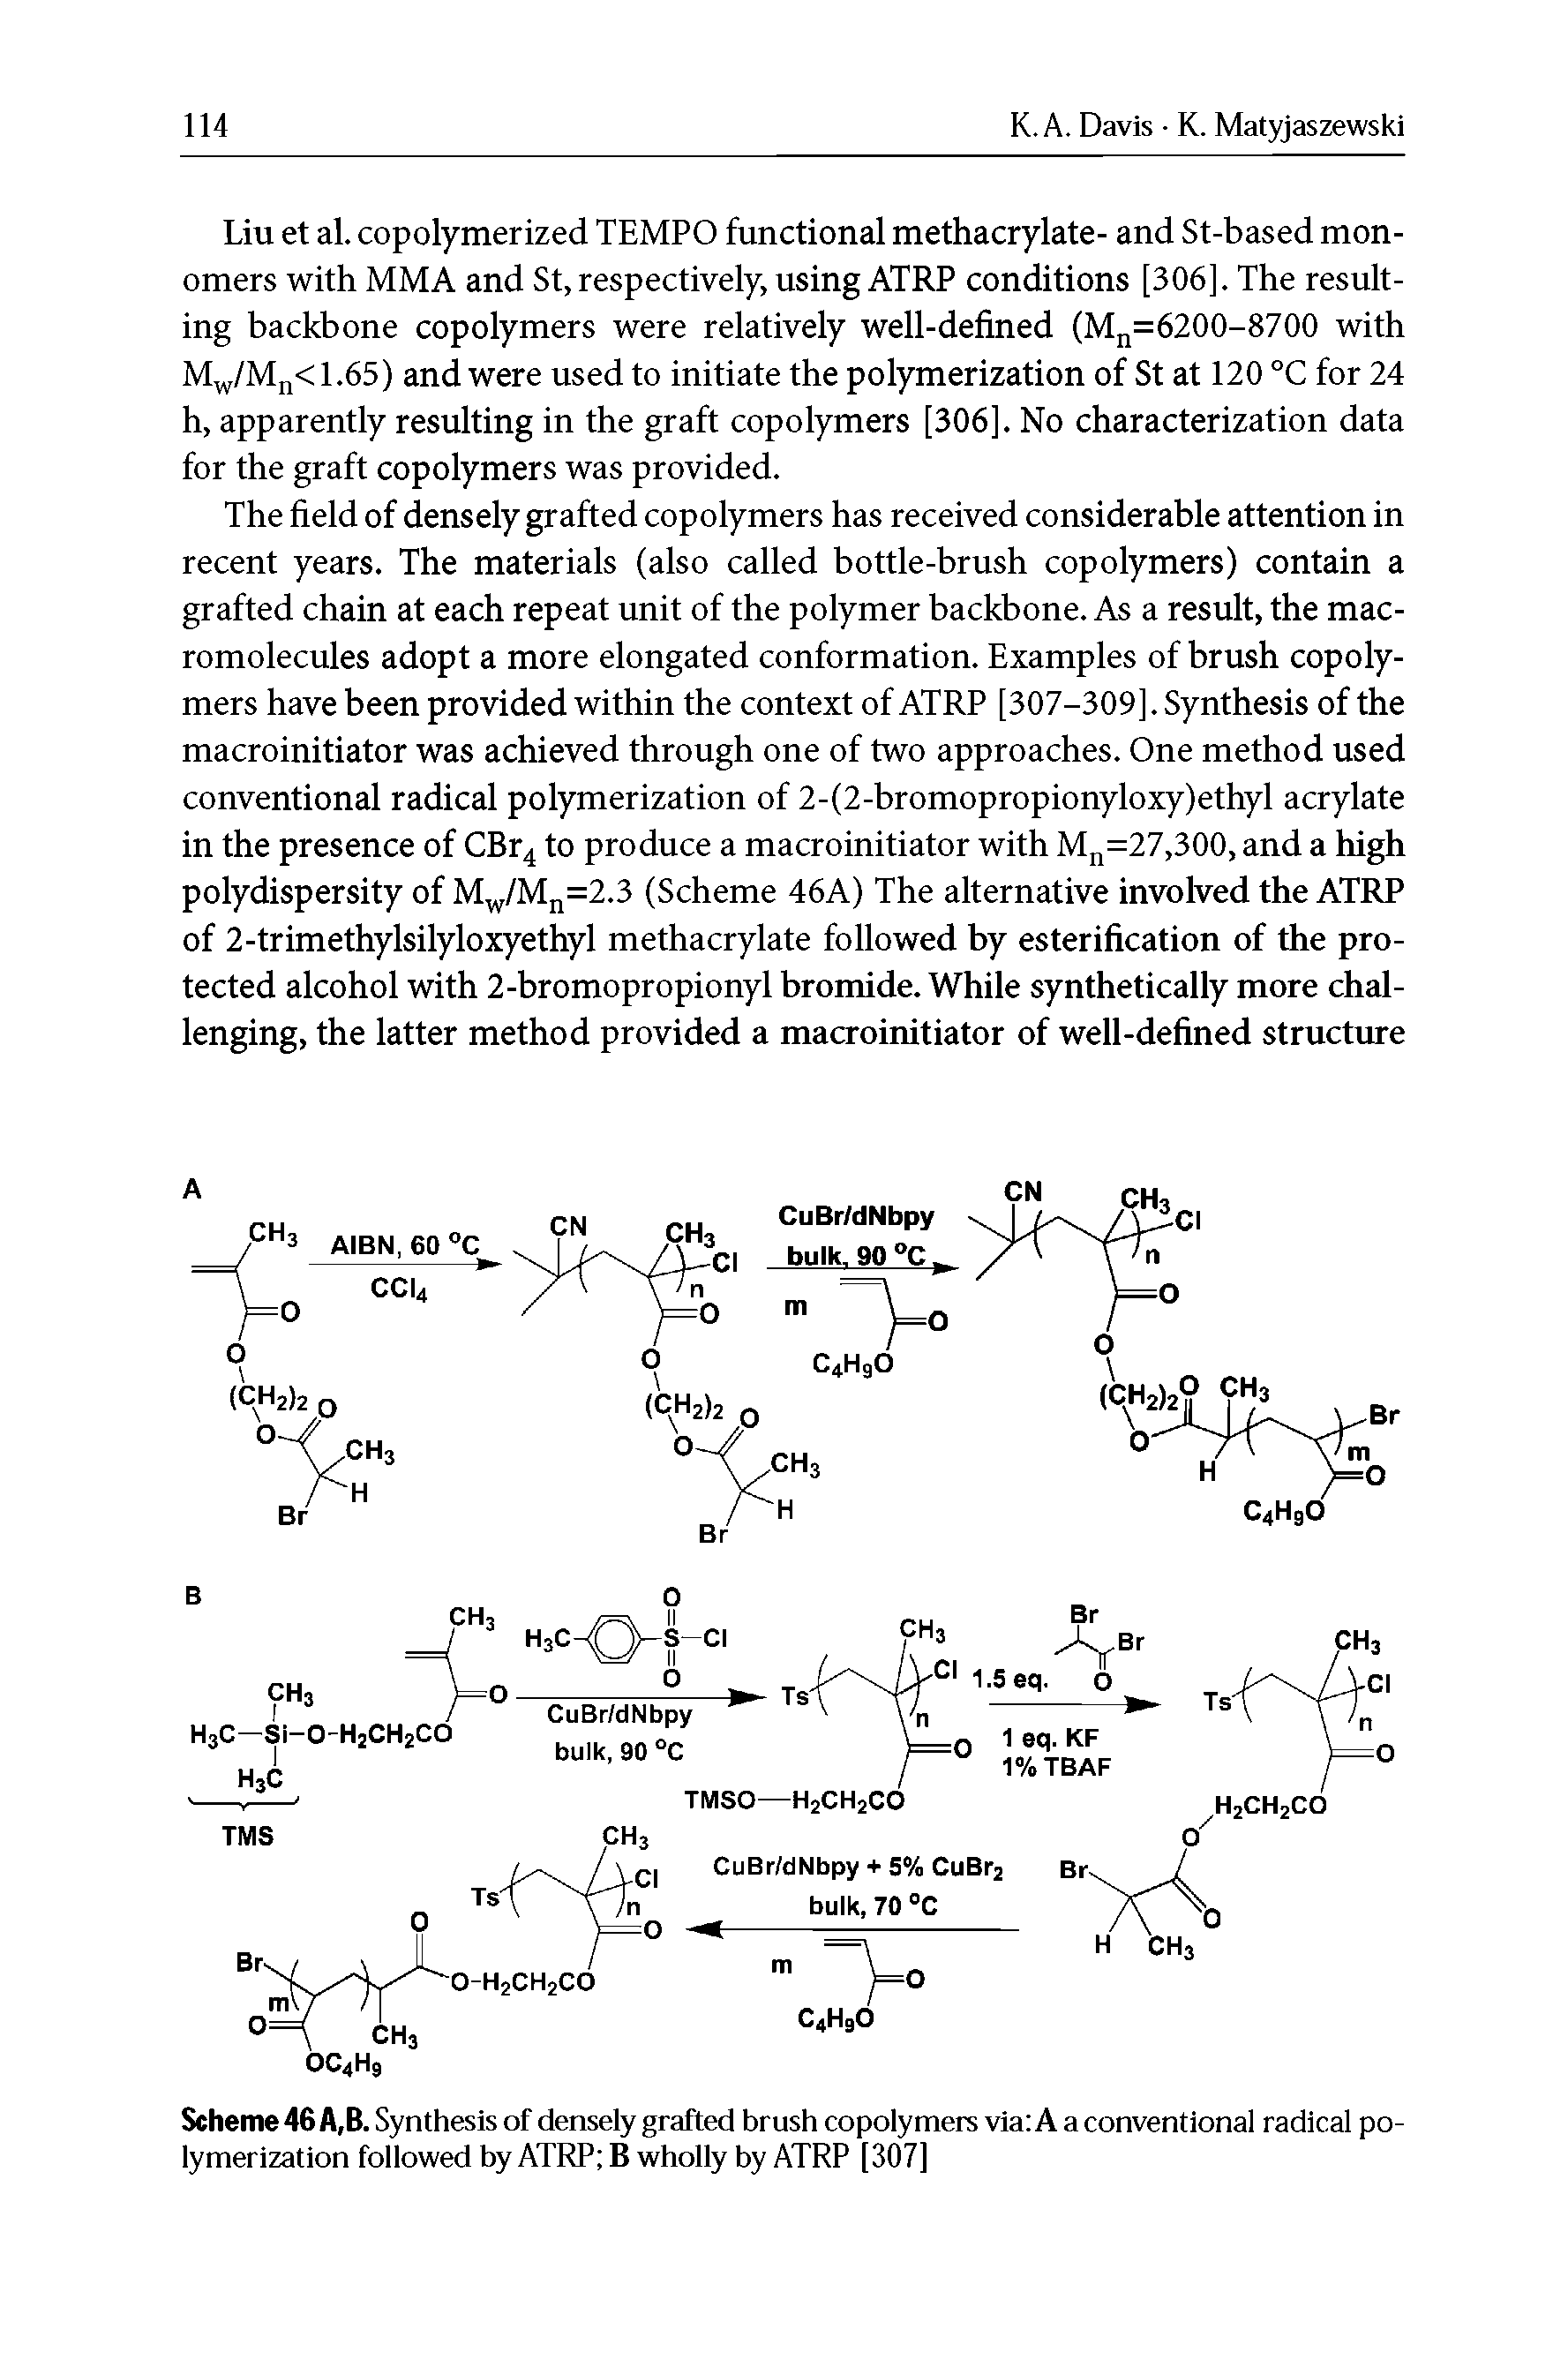 Scheme 46 A,B. Synthesis of densely grafted brush copolymers via A a conventional radical polymerization followed by ATRP B wholly by ATRP [307]...